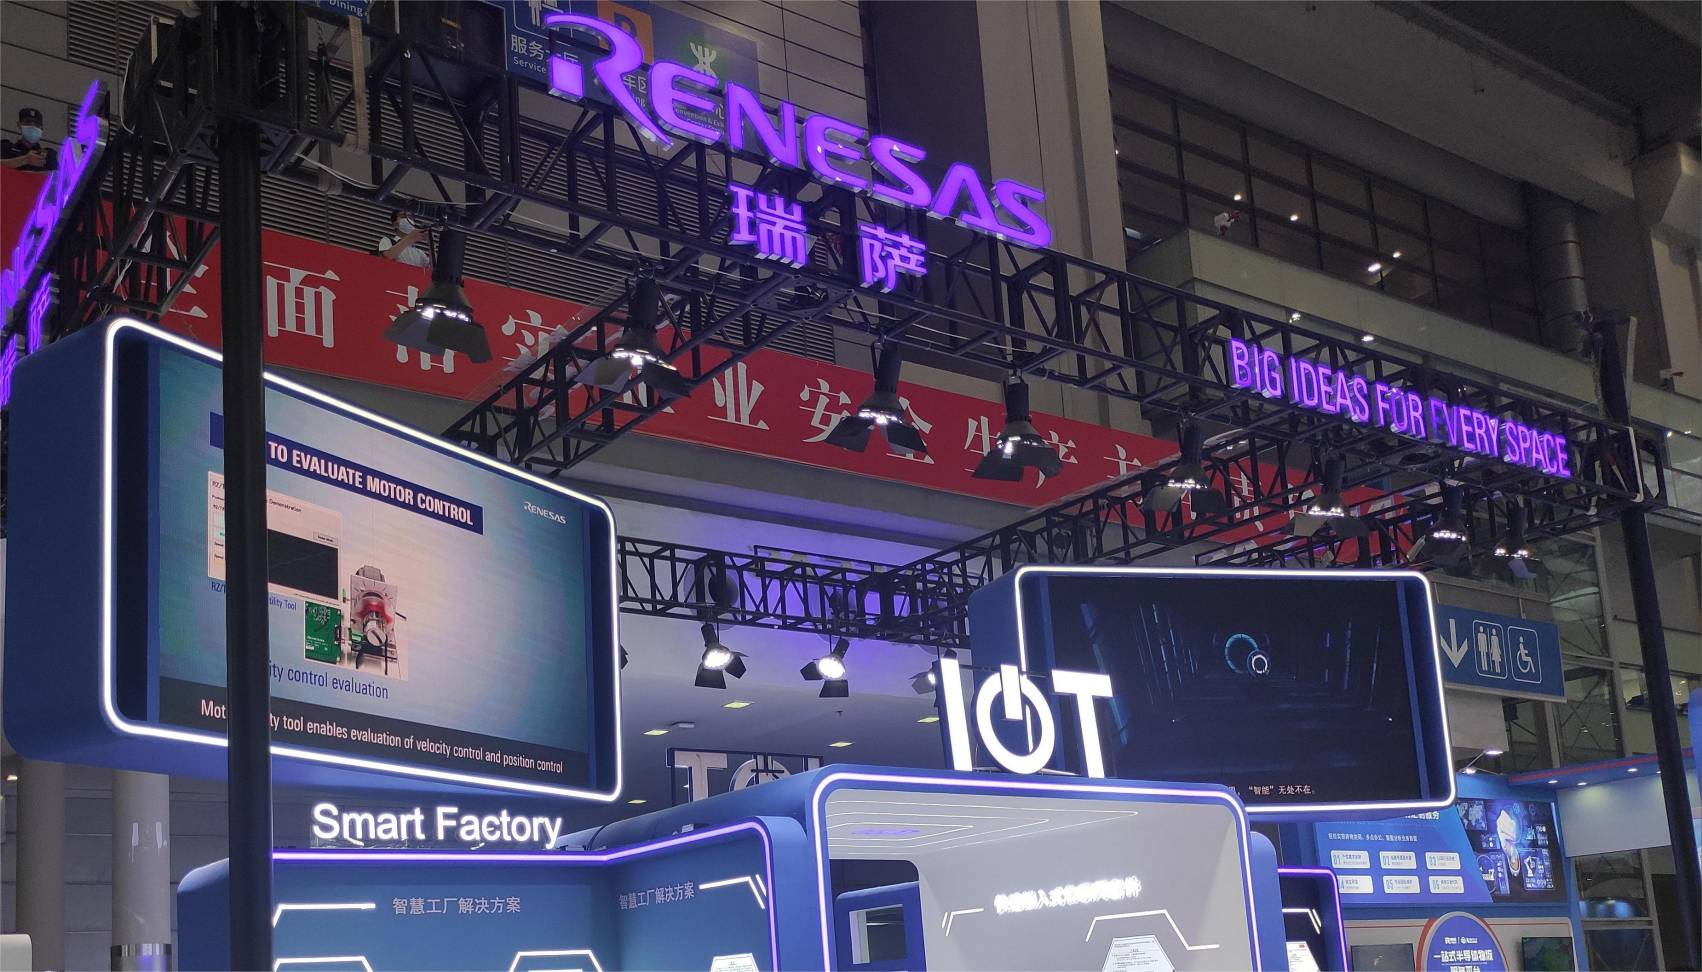 Renesas CEO: automotive chip shortage will be alleviated in mid-2023